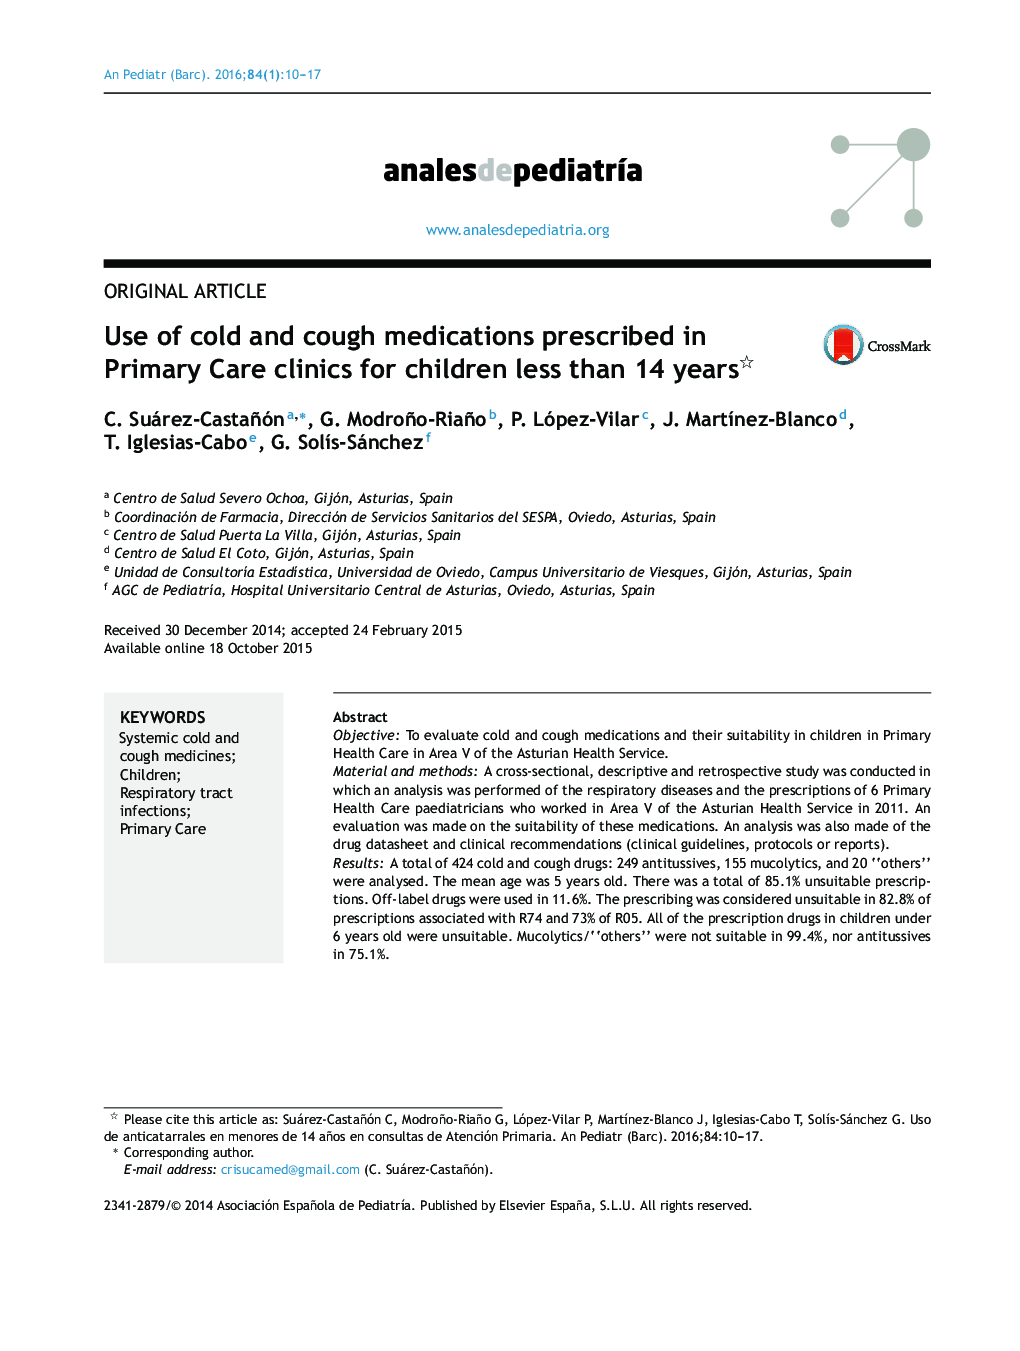 Use of cold and cough medications prescribed in Primary Care clinics for children less than 14 years 